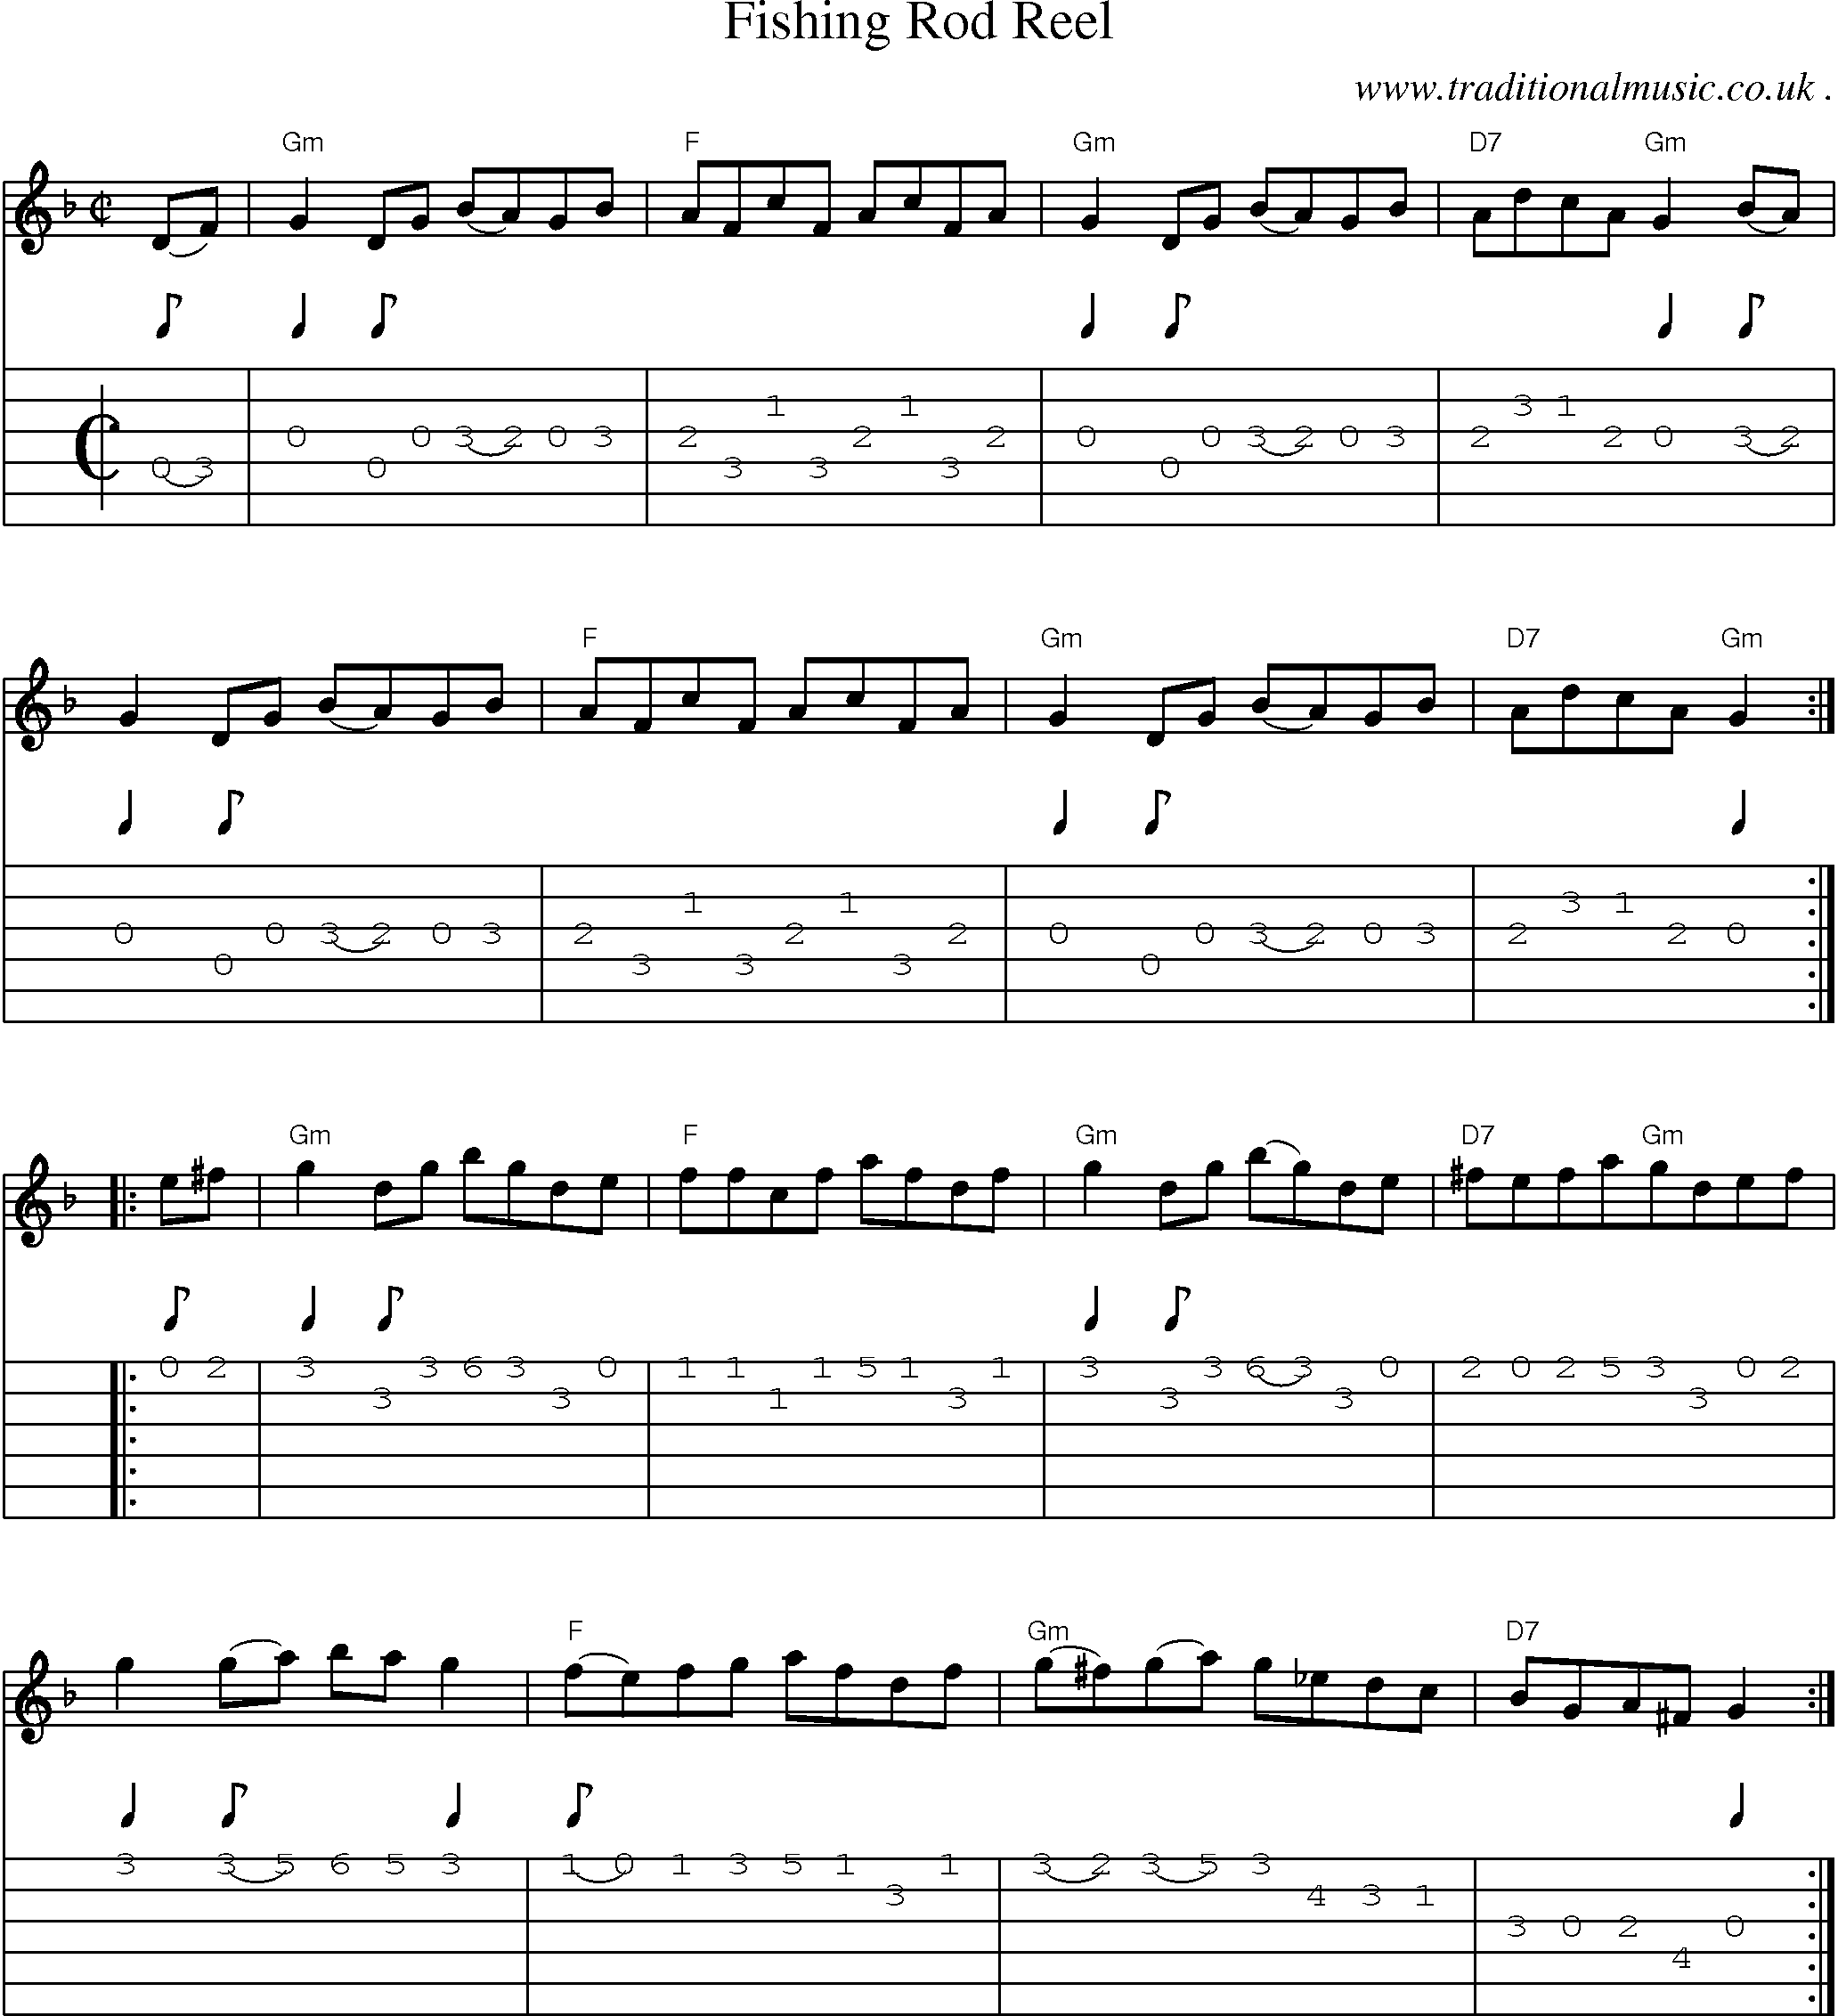 Sheet-Music and Guitar Tabs for Fishing Rod Reel